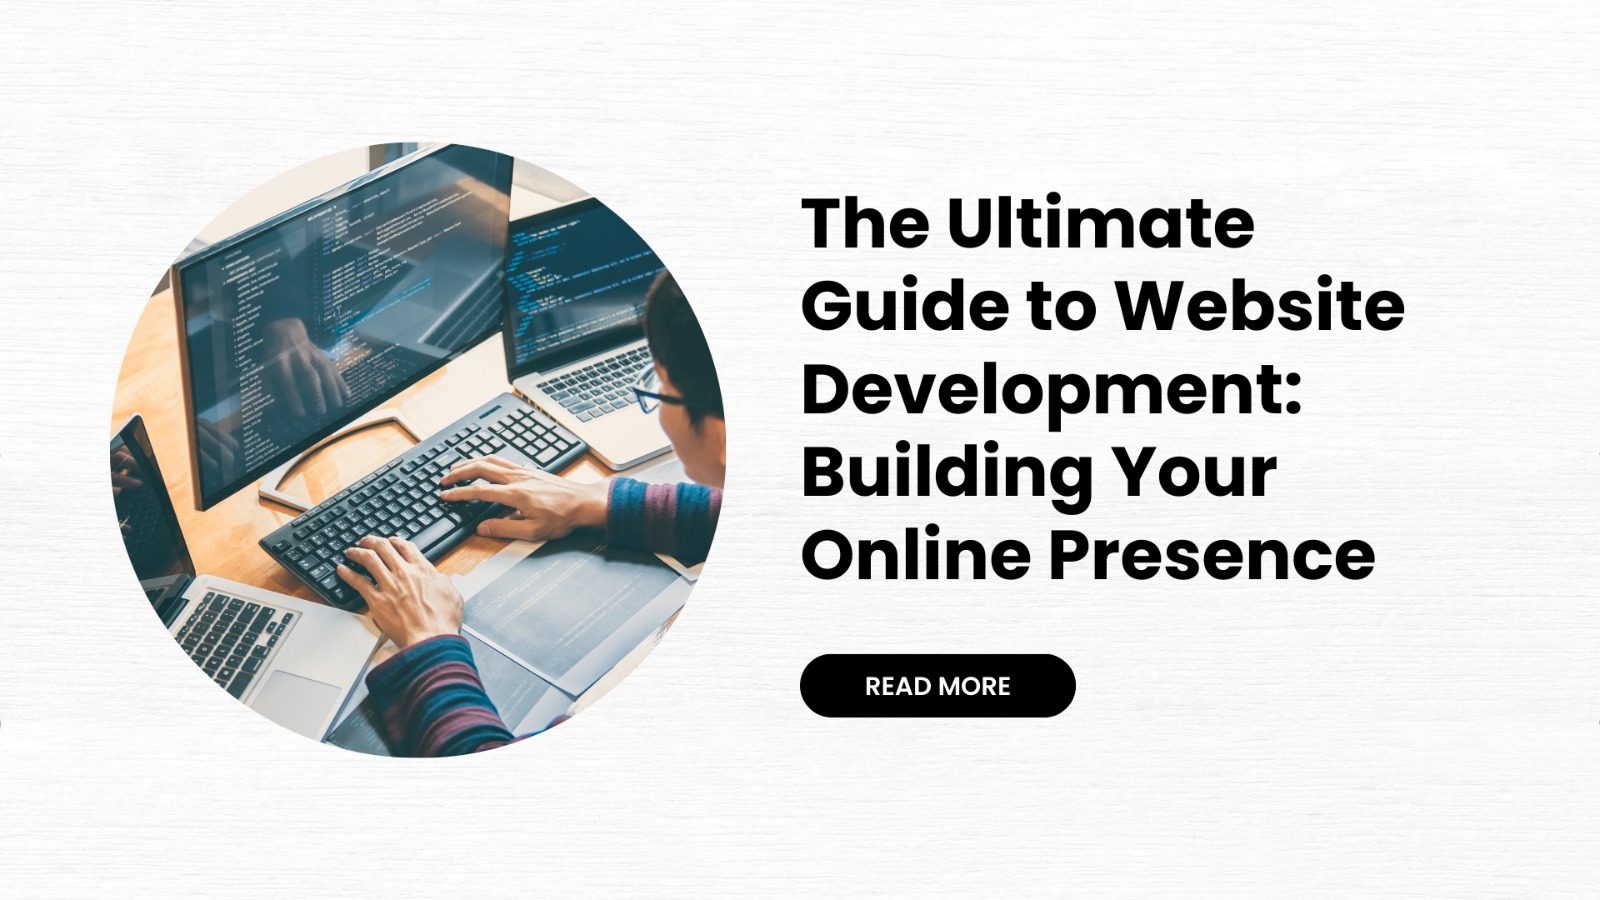 The Ultimate Guide to Website Development: Building Your Online Presence